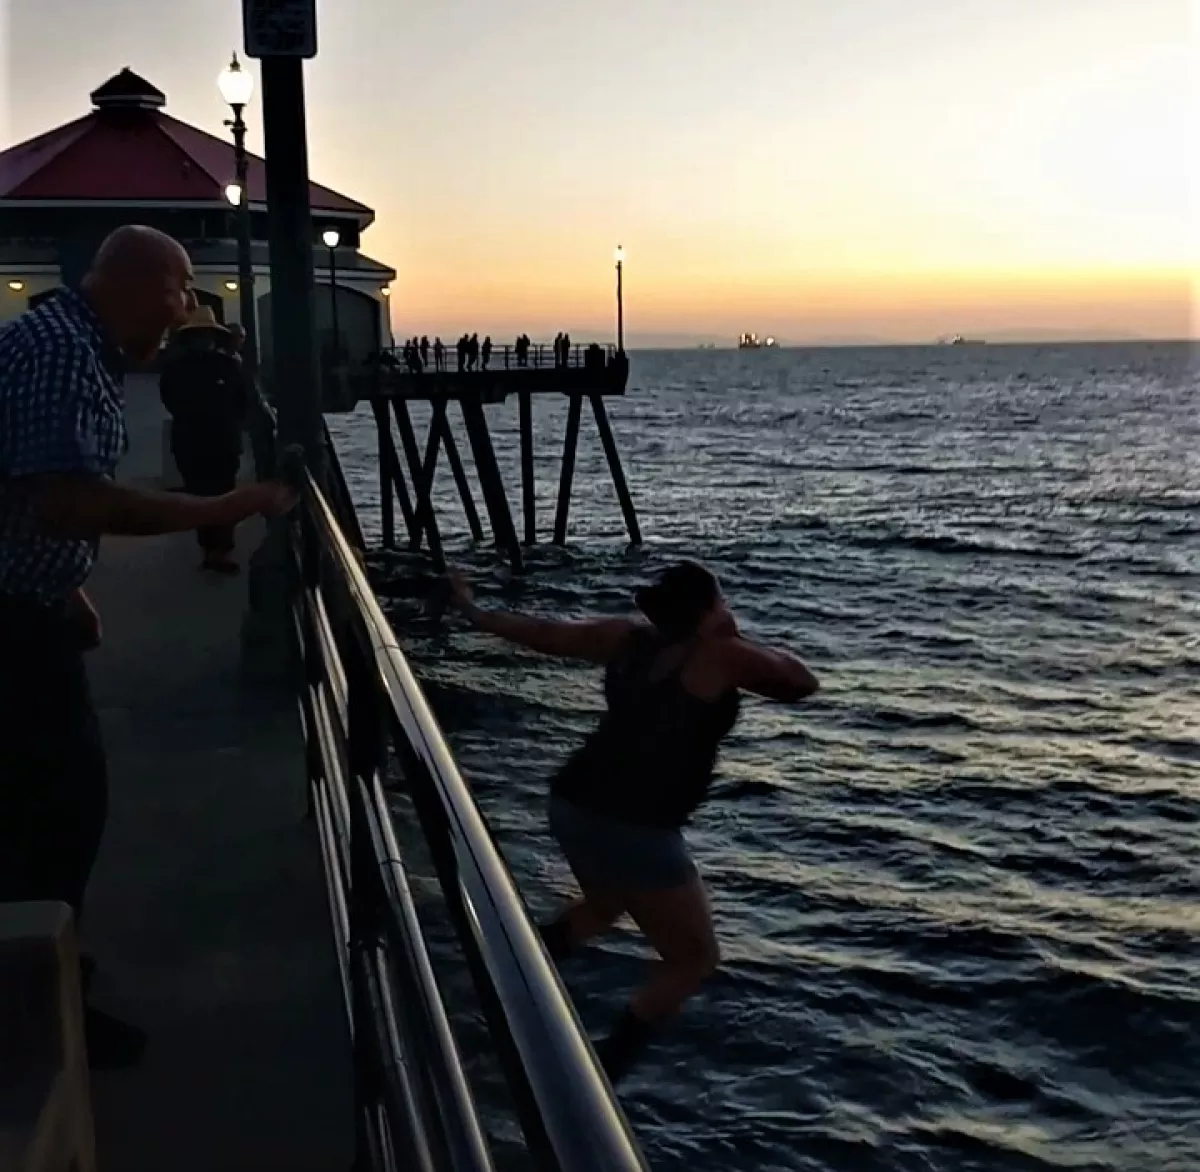 After jumping from Huntington Beach Pier, a man perishes